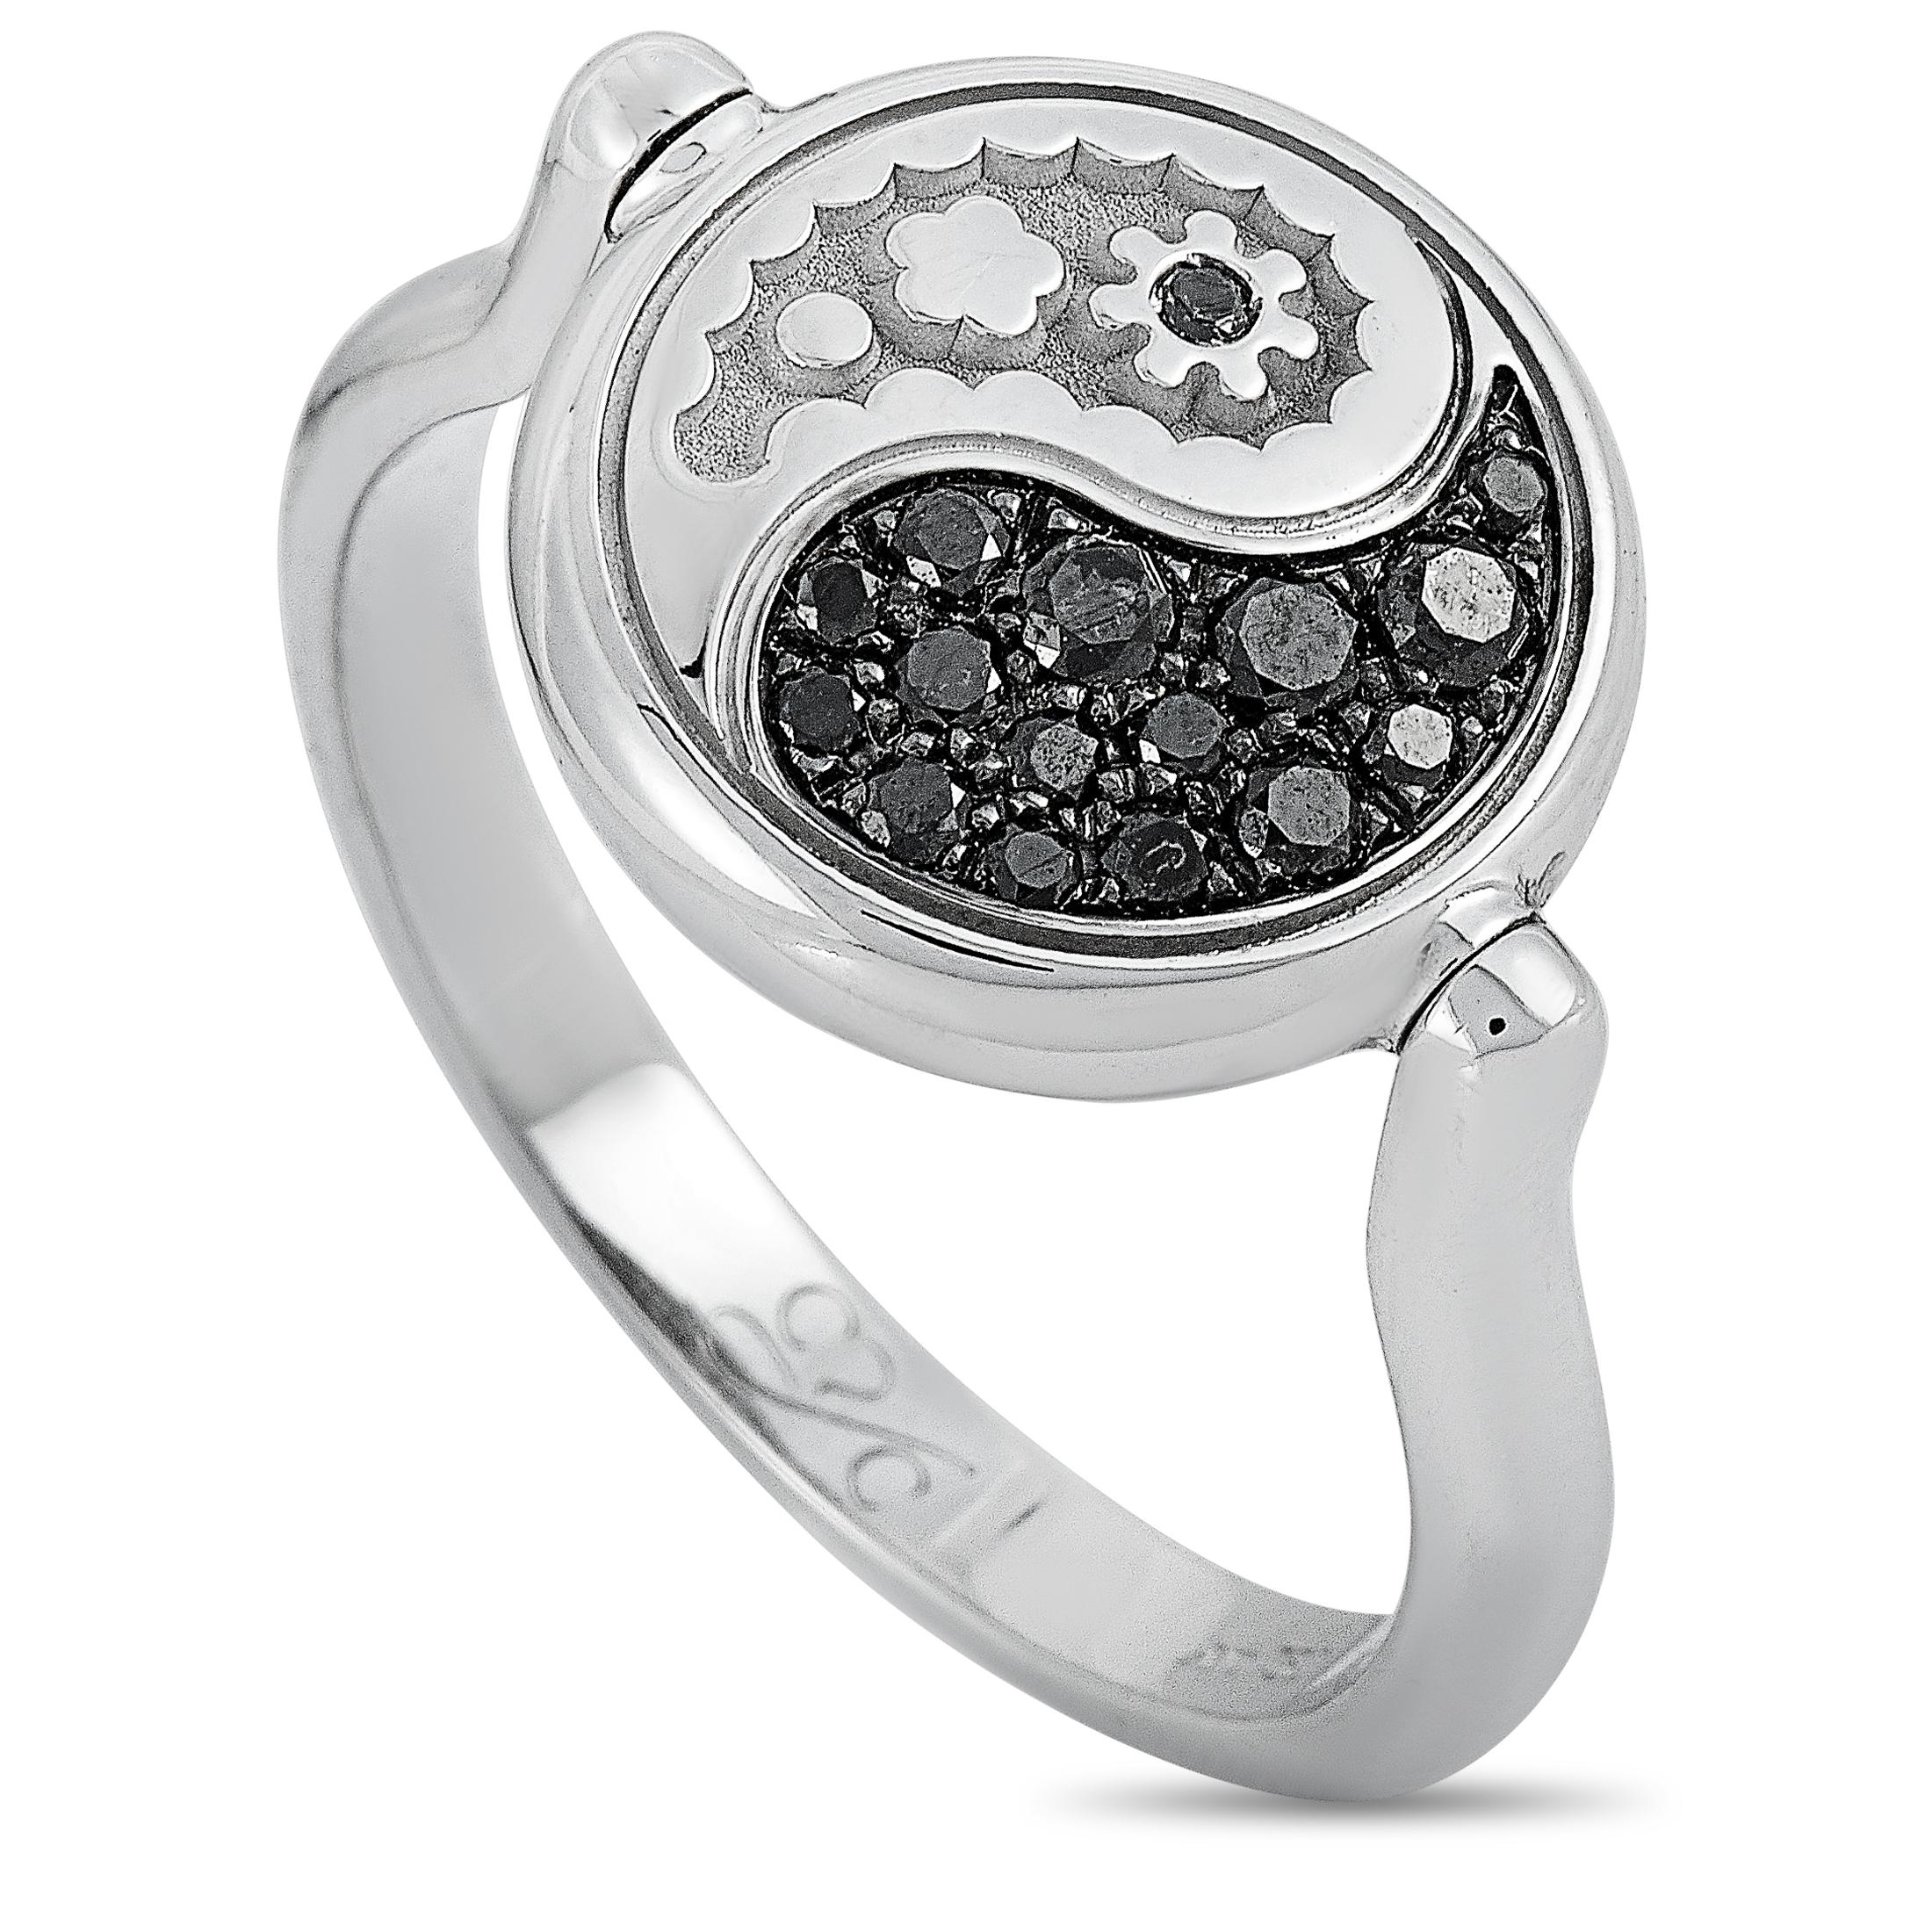 The Carrera y Carrera “Aqua” ring is made of 18K white gold and embellished with white and black diamonds that amount to 0.34 carats. The ring weighs 5.2 grams and boasts band thickness of 2 mm and top height of 4 mm, while top dimensions measure 12